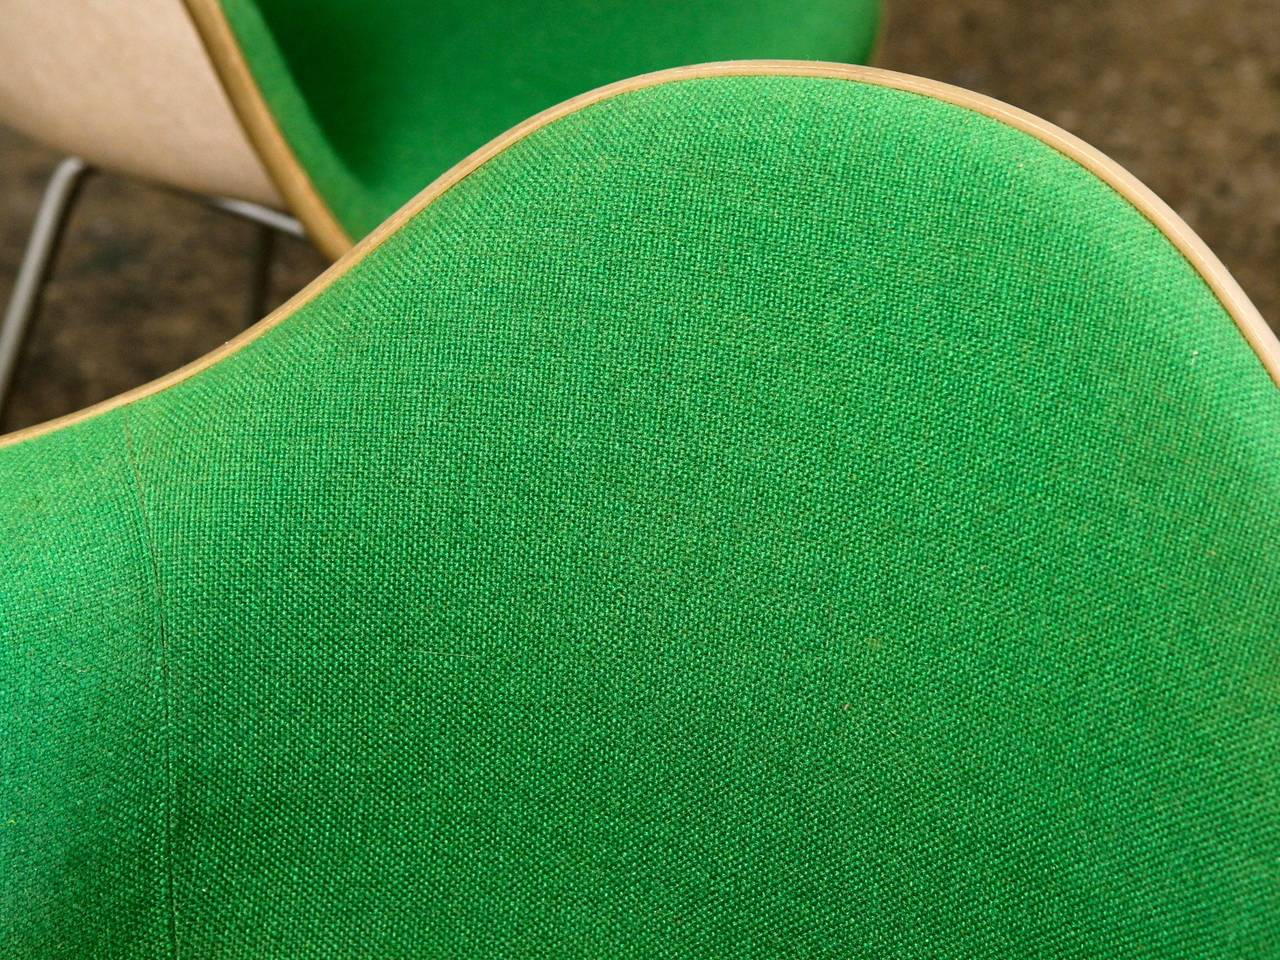 Mid-Century Modern Vintage Green Eames Upholstered Rocking Chair - One Left